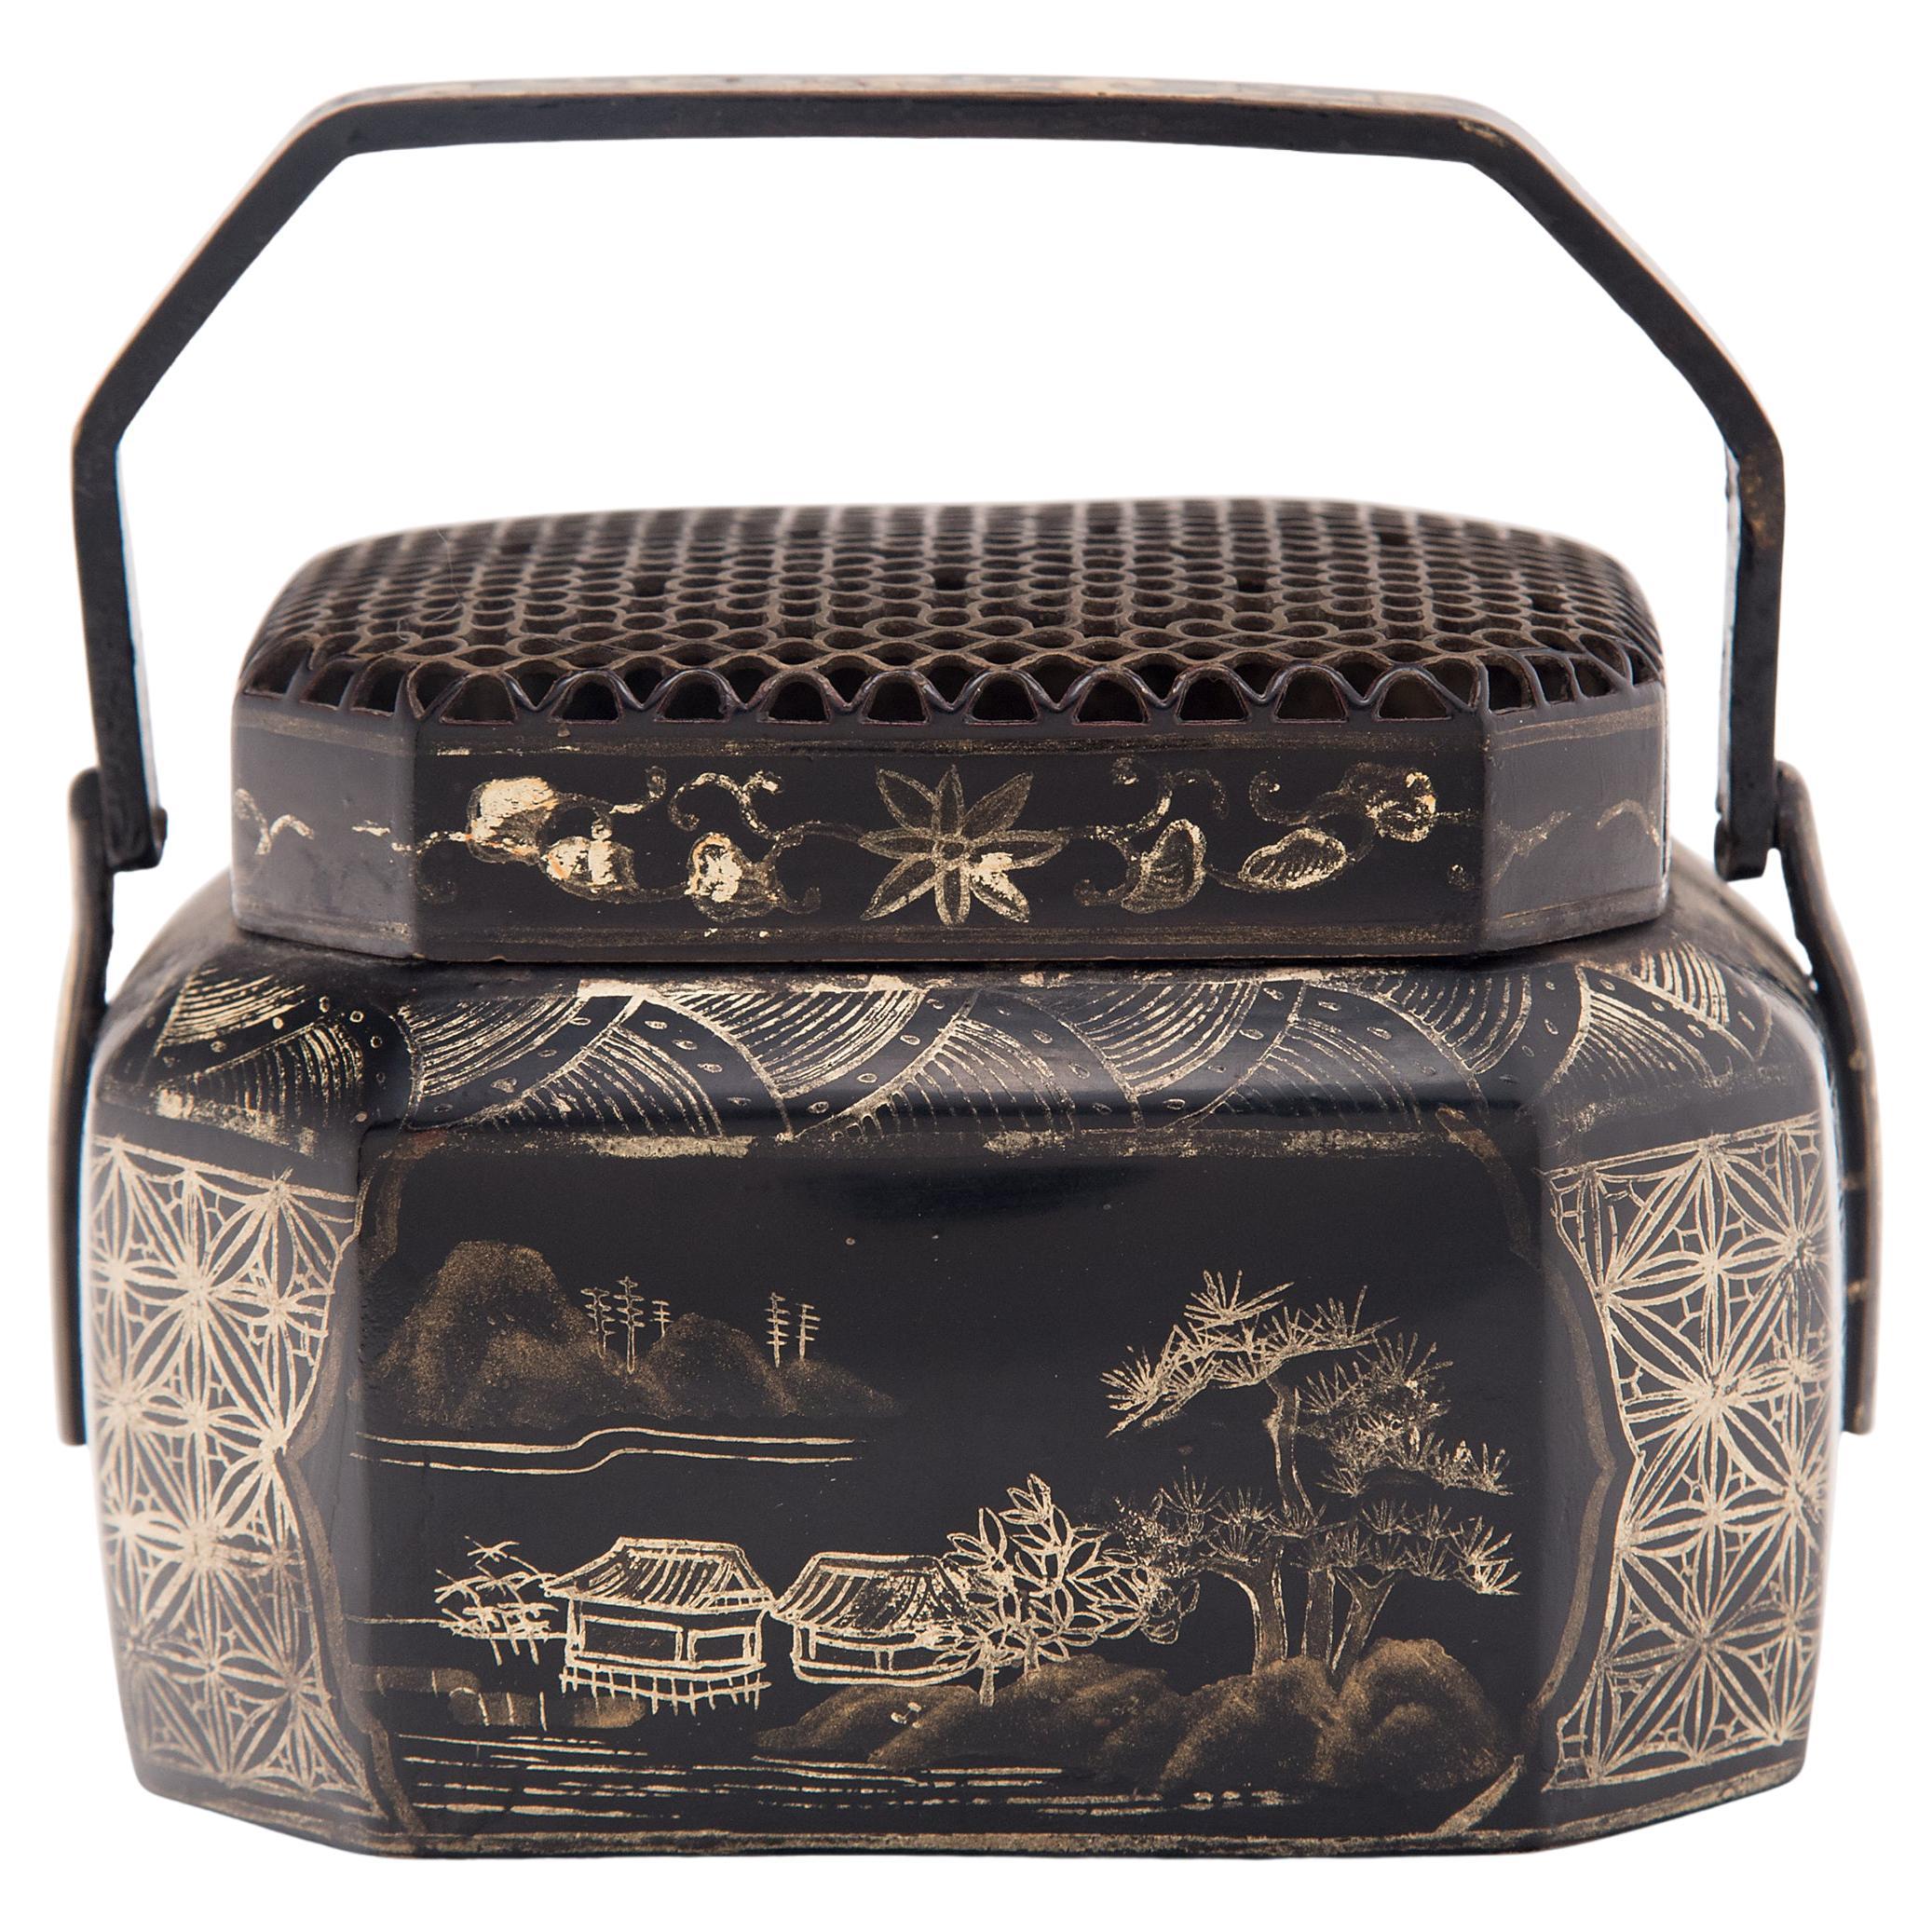 Chinese Painted Shan Shui Brazier, c. 1900